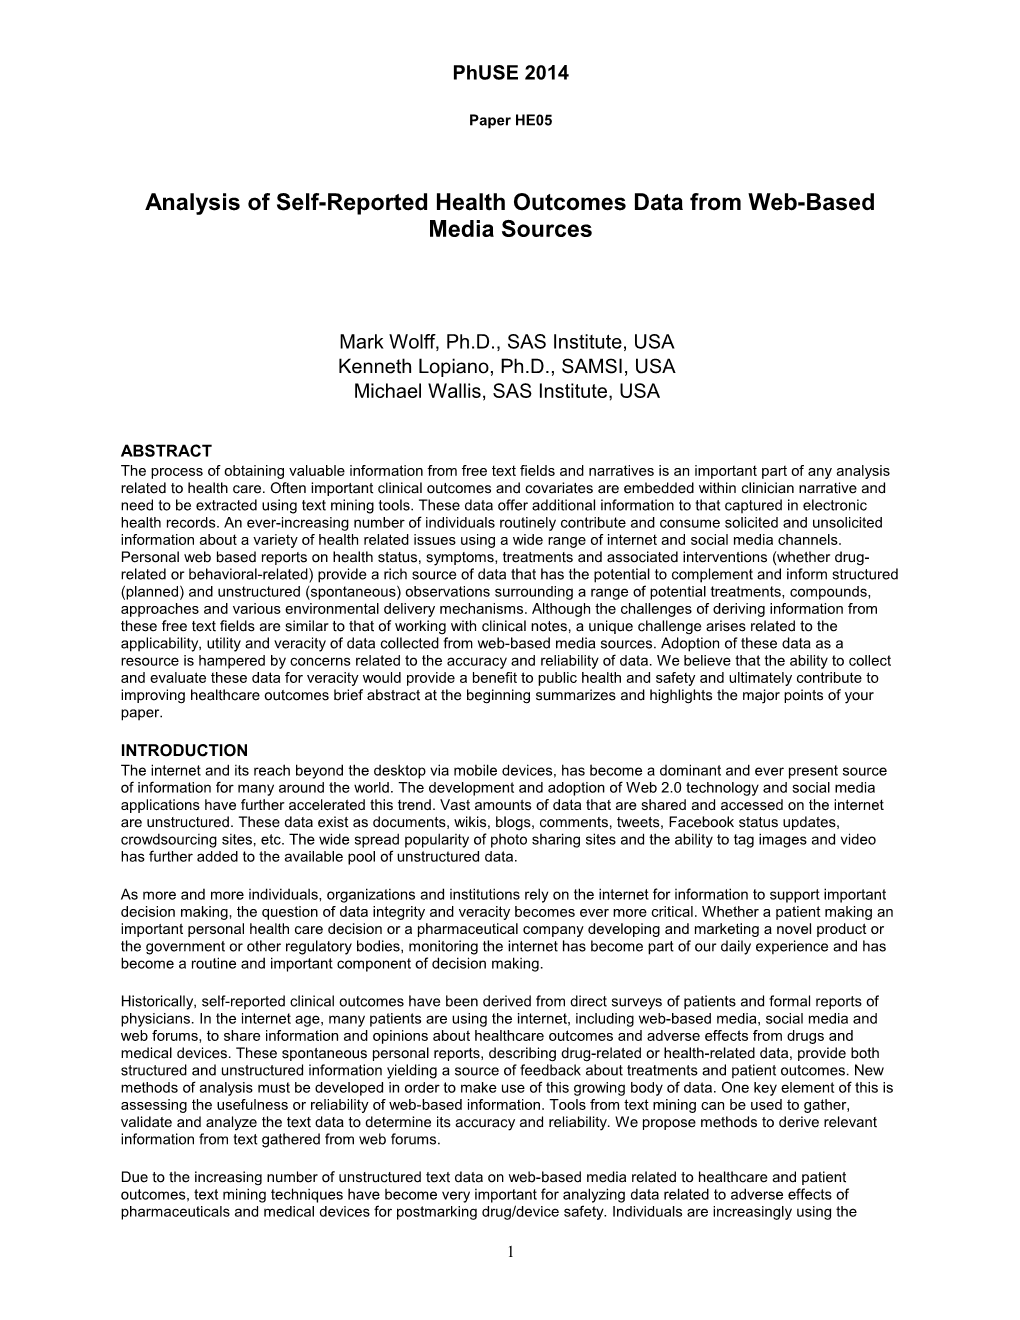 Analysis of Self-Reported Health Outcomes Data from Web-Based Media Sources